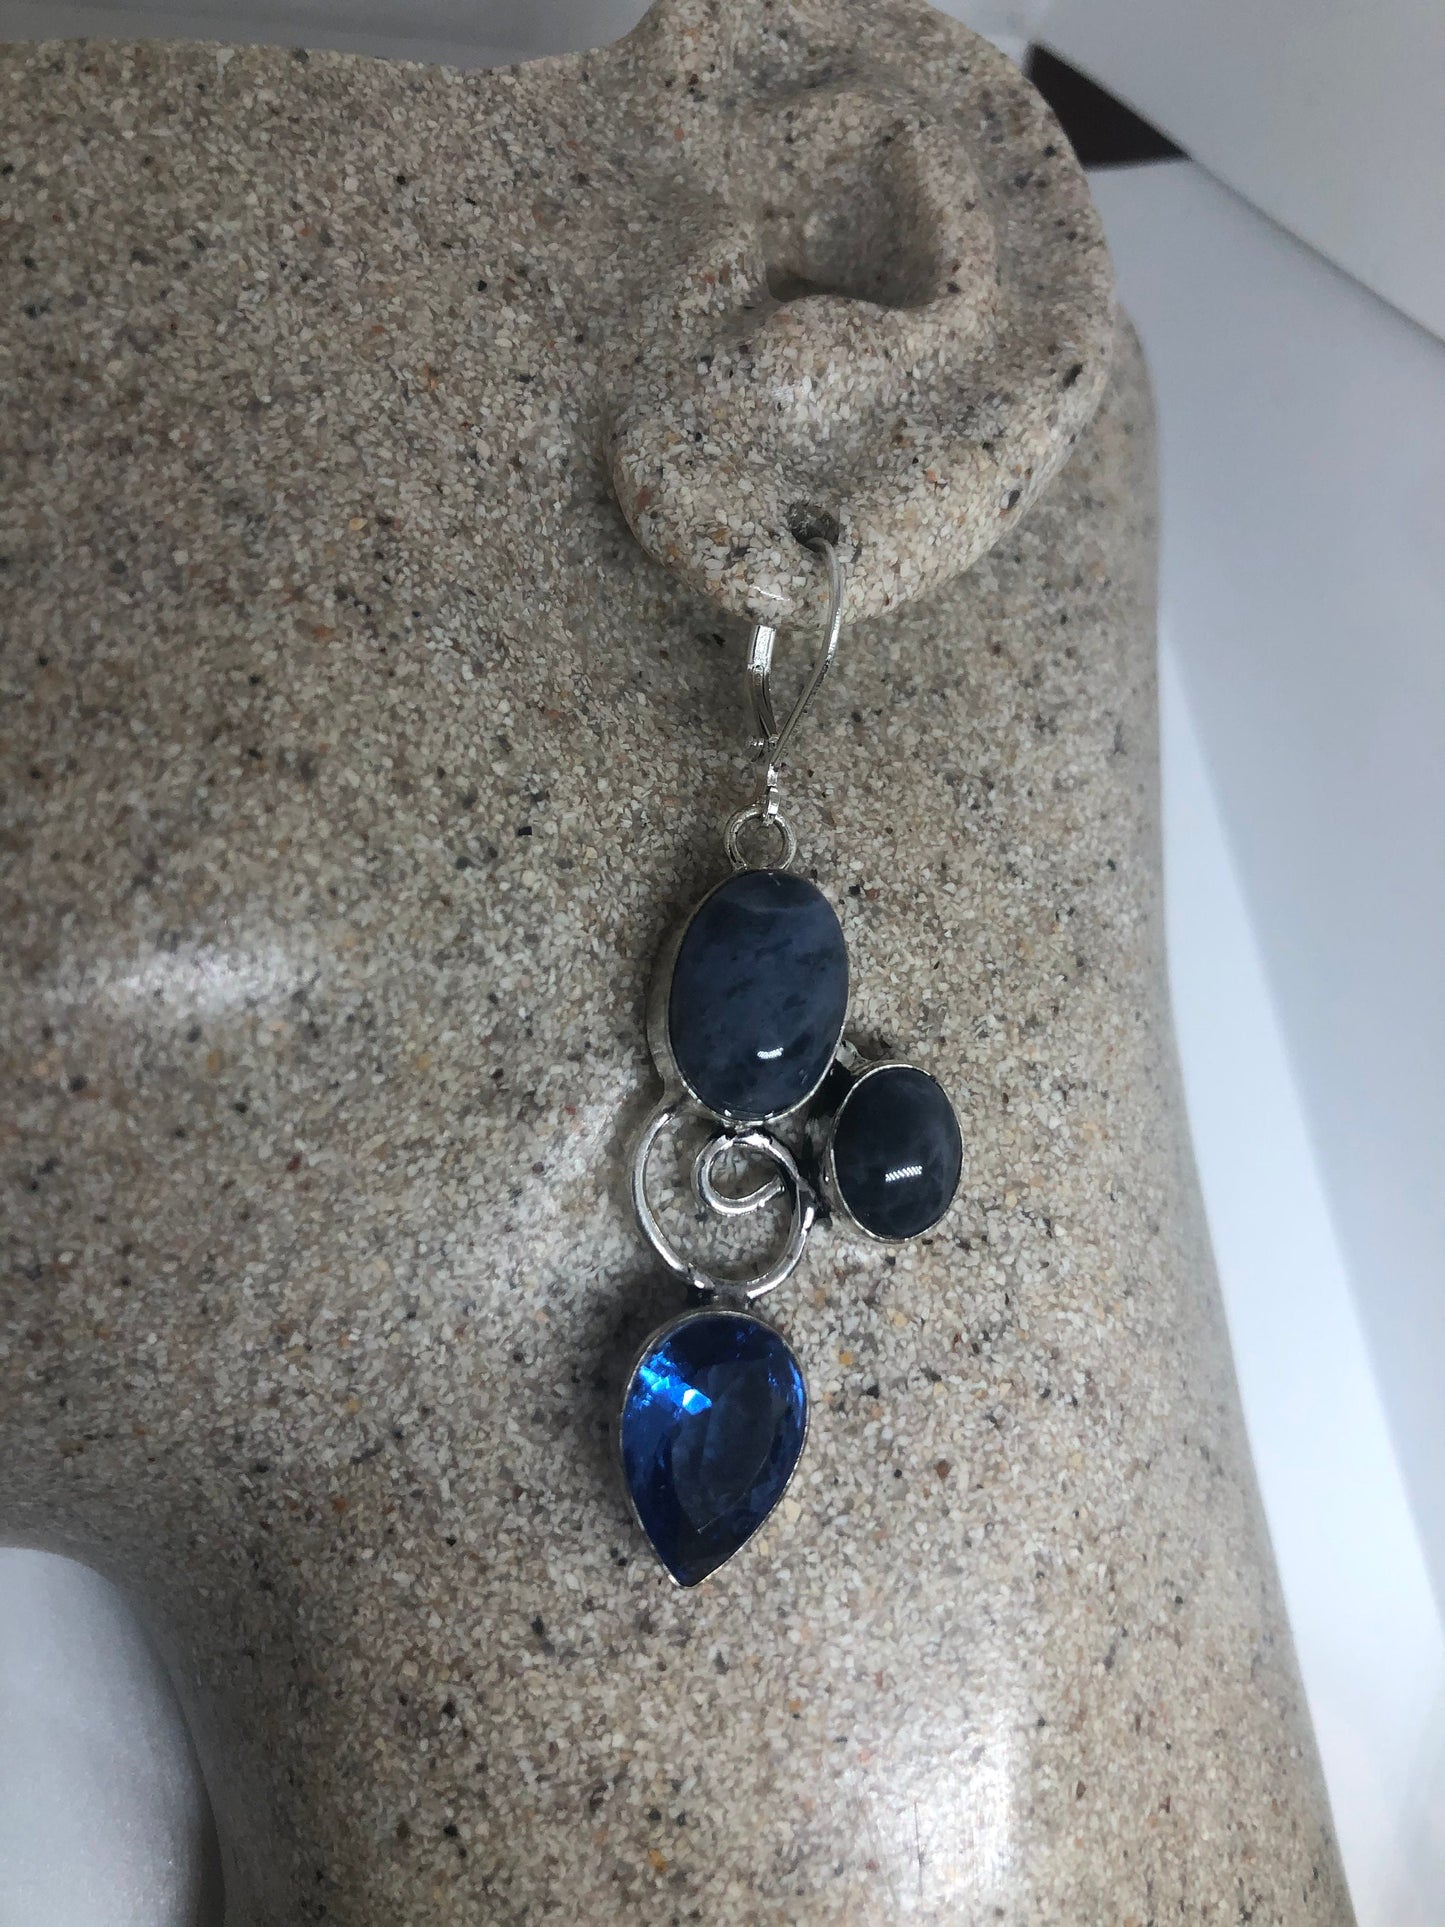 Vintage Blue Glass and Sodalite Sterling Silver Lever Back Chandelier Earrings